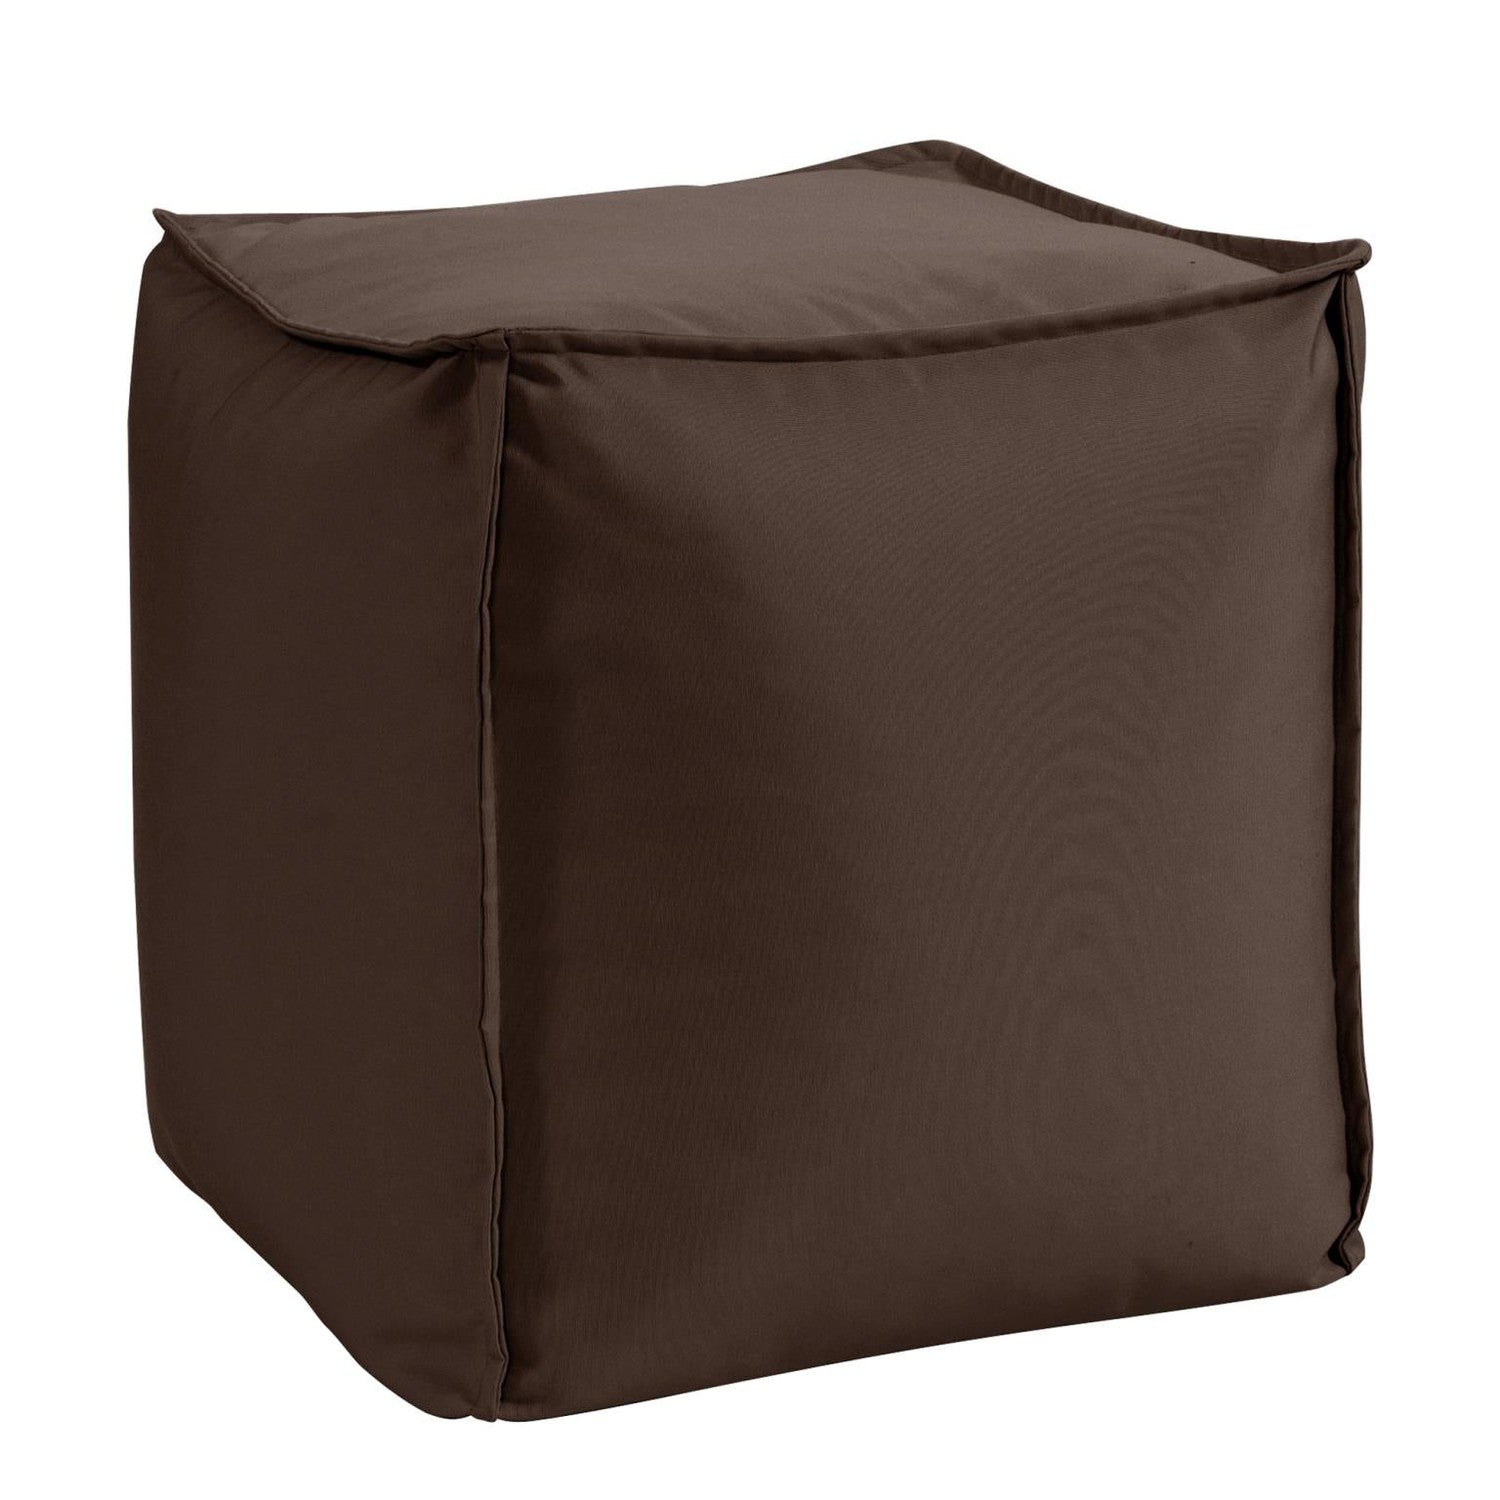 Outdoor Square Pouf-The Howard Elliott Collection-HOWARD-Q873-462-Stools & OttomansChocolate-Cube Pouf-26-France and Son